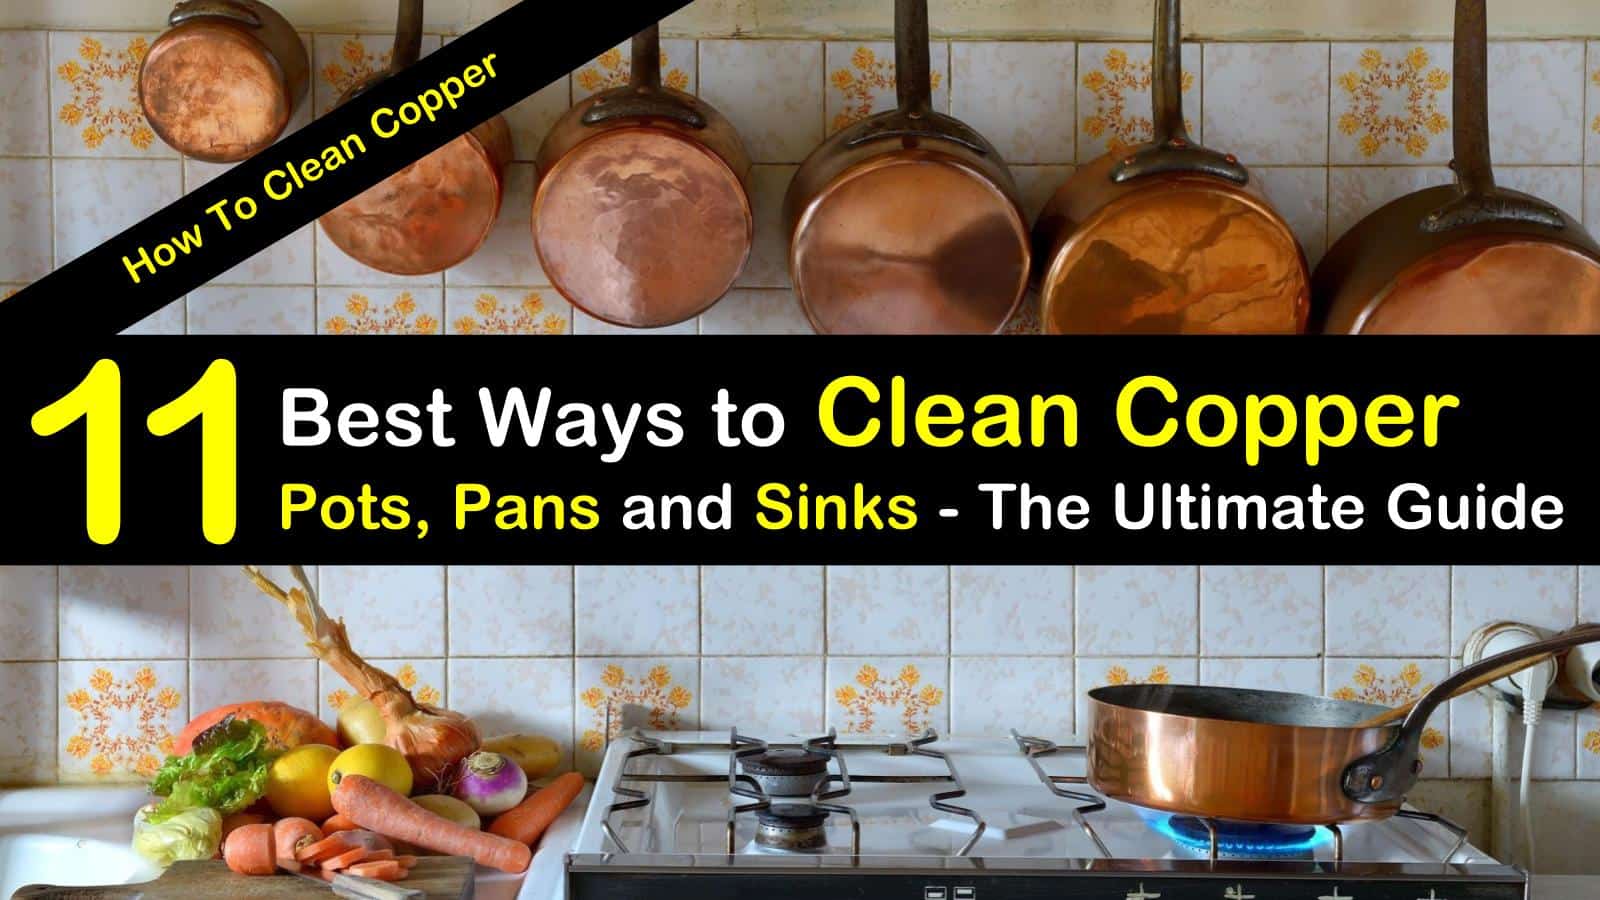 30 of the Best Ways to Clean Copper Pots